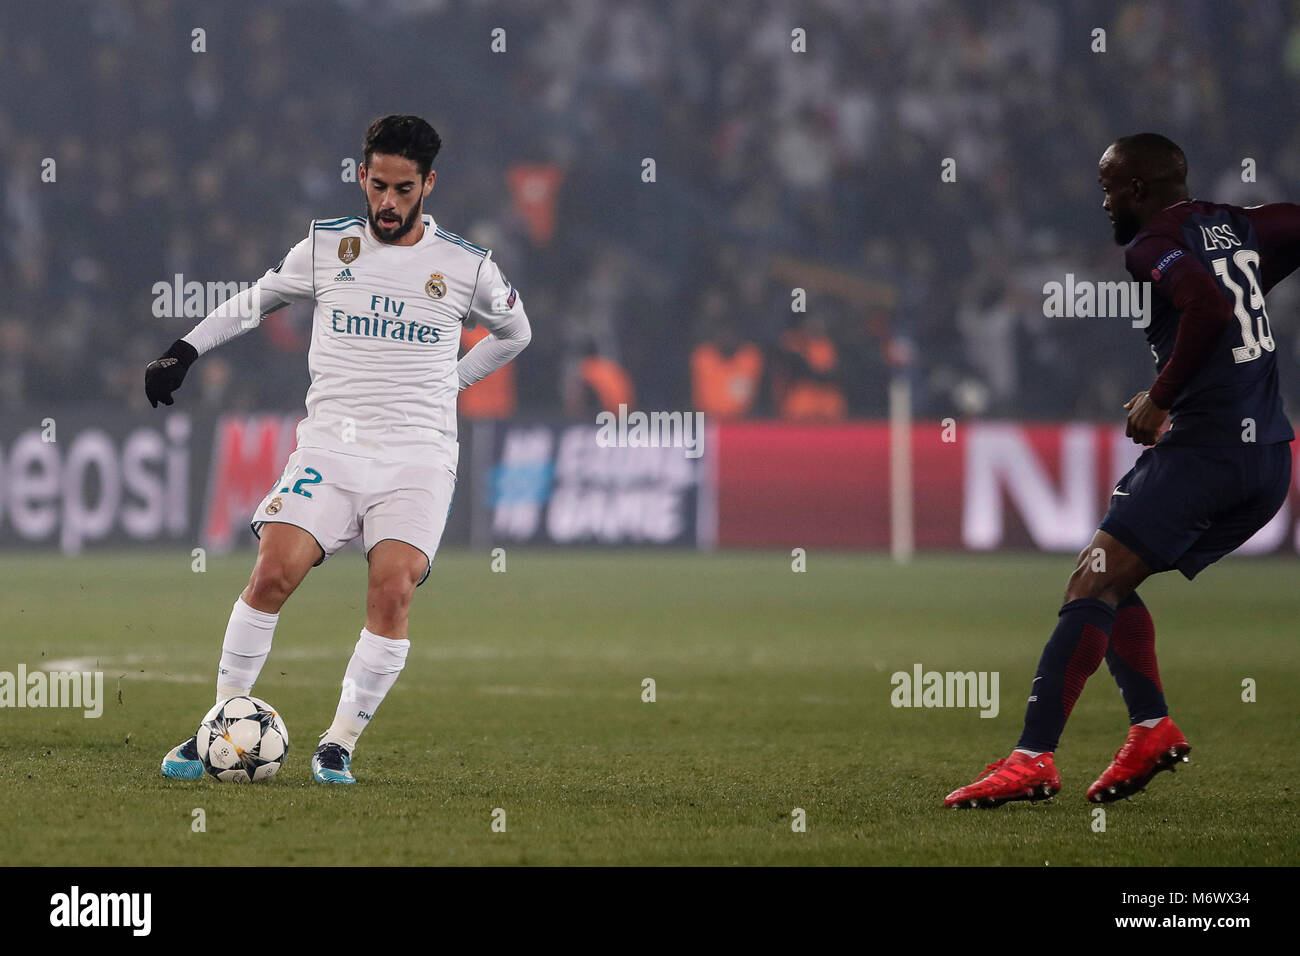 Paris, France, March 6, 2018. Francisco Alarcon, ISCO (Real Madrid) drives forward on the ball Lassana Diarra (PSG), UCL Champions League match between PSG vs Real Madrid at the Parc des Princes stadium in Credit: Gtres Información más Comuniación on line, S.L./Alamy Live News Stock Photo